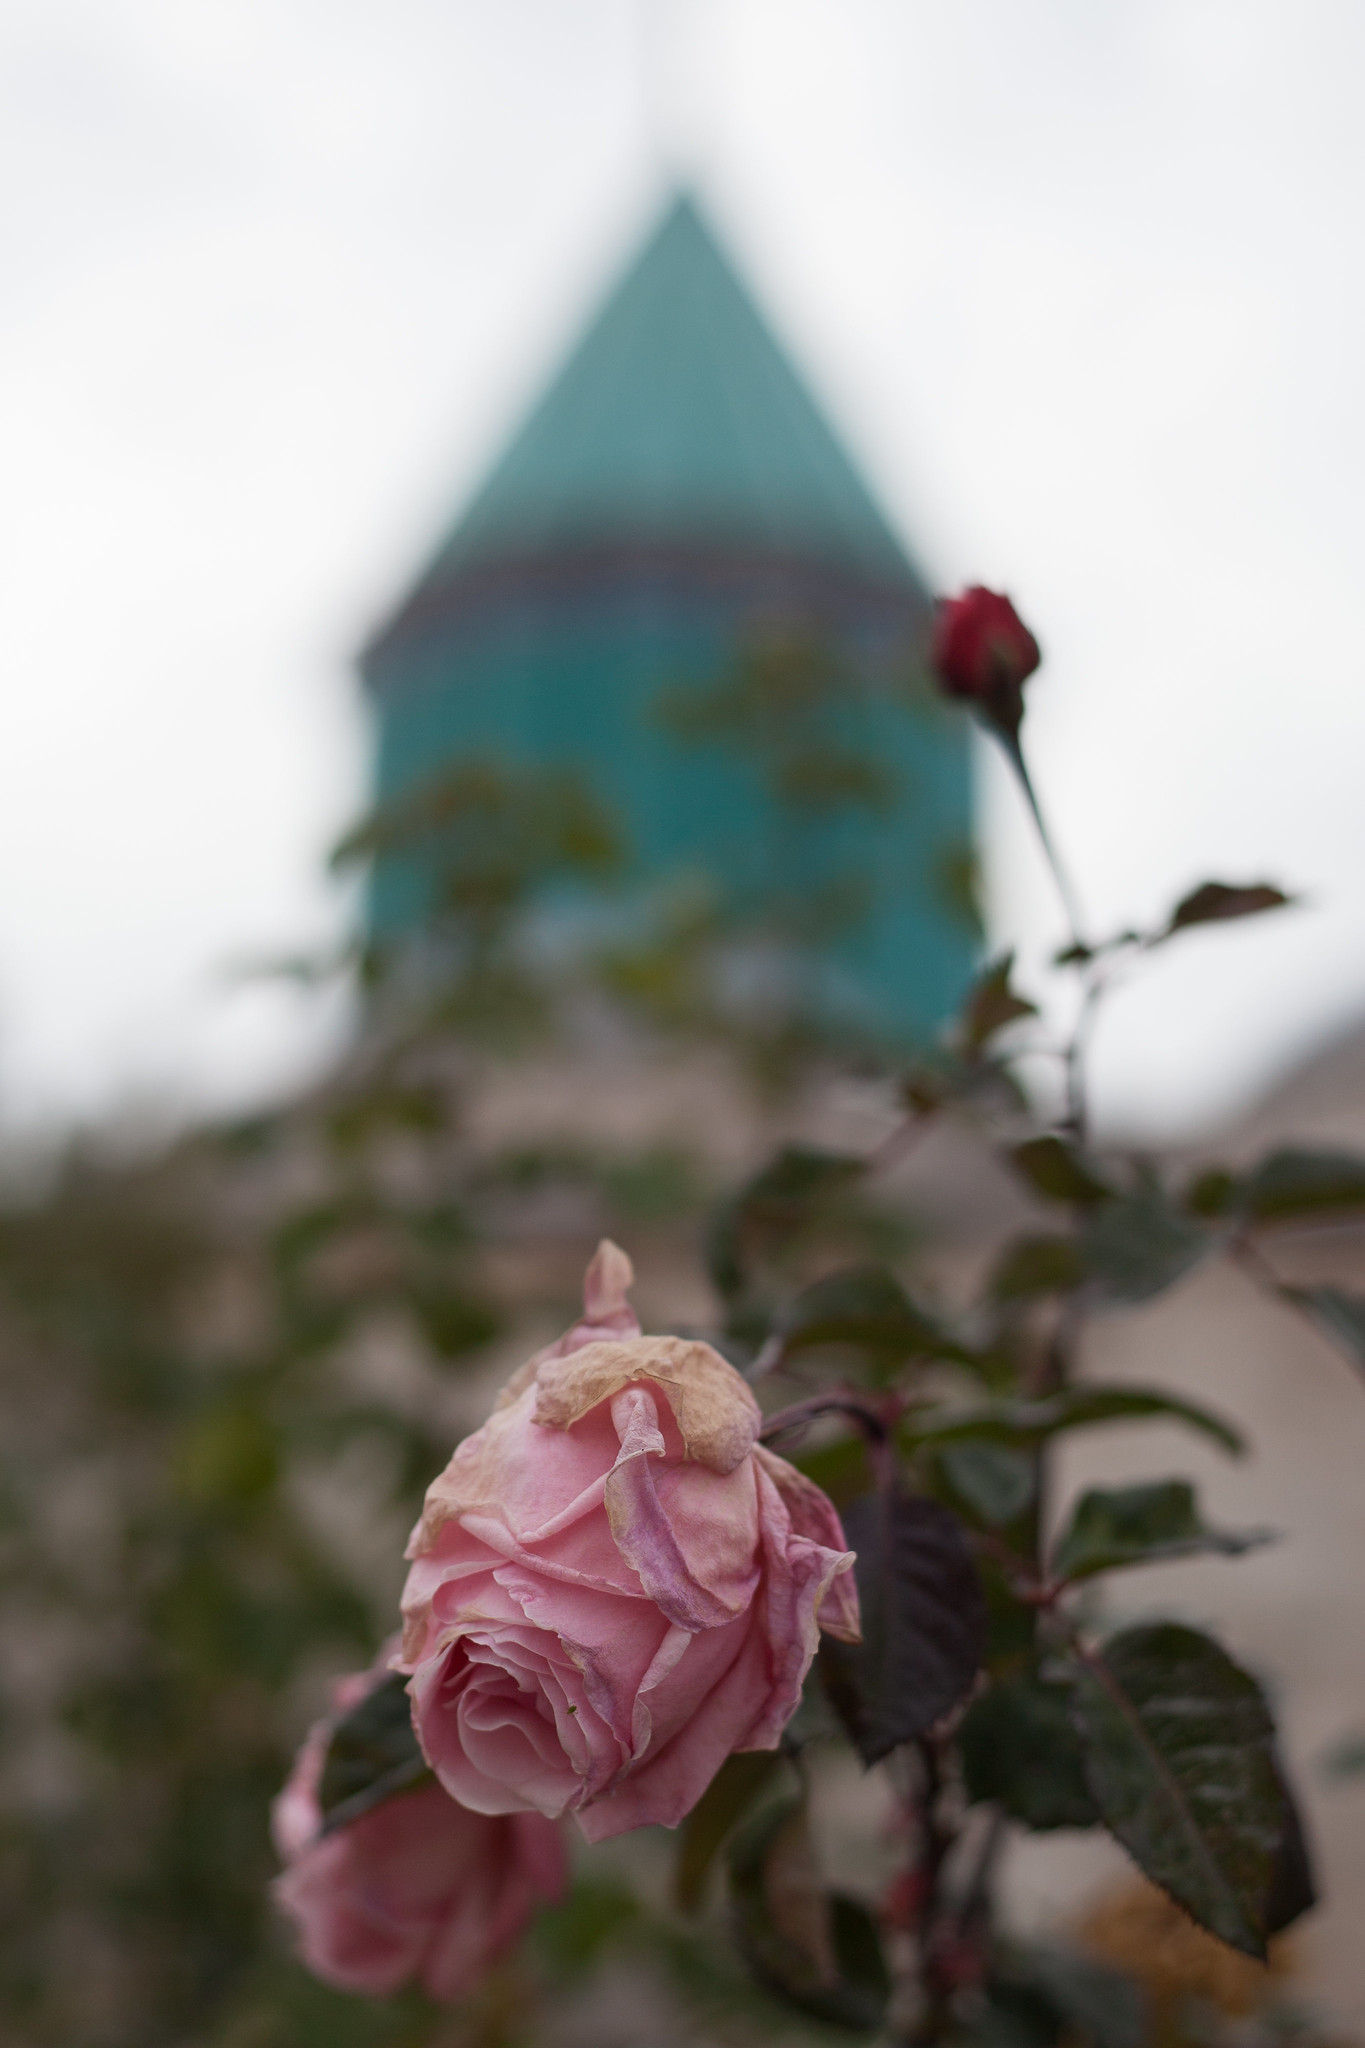 Roses in the garden round Rumi's grave